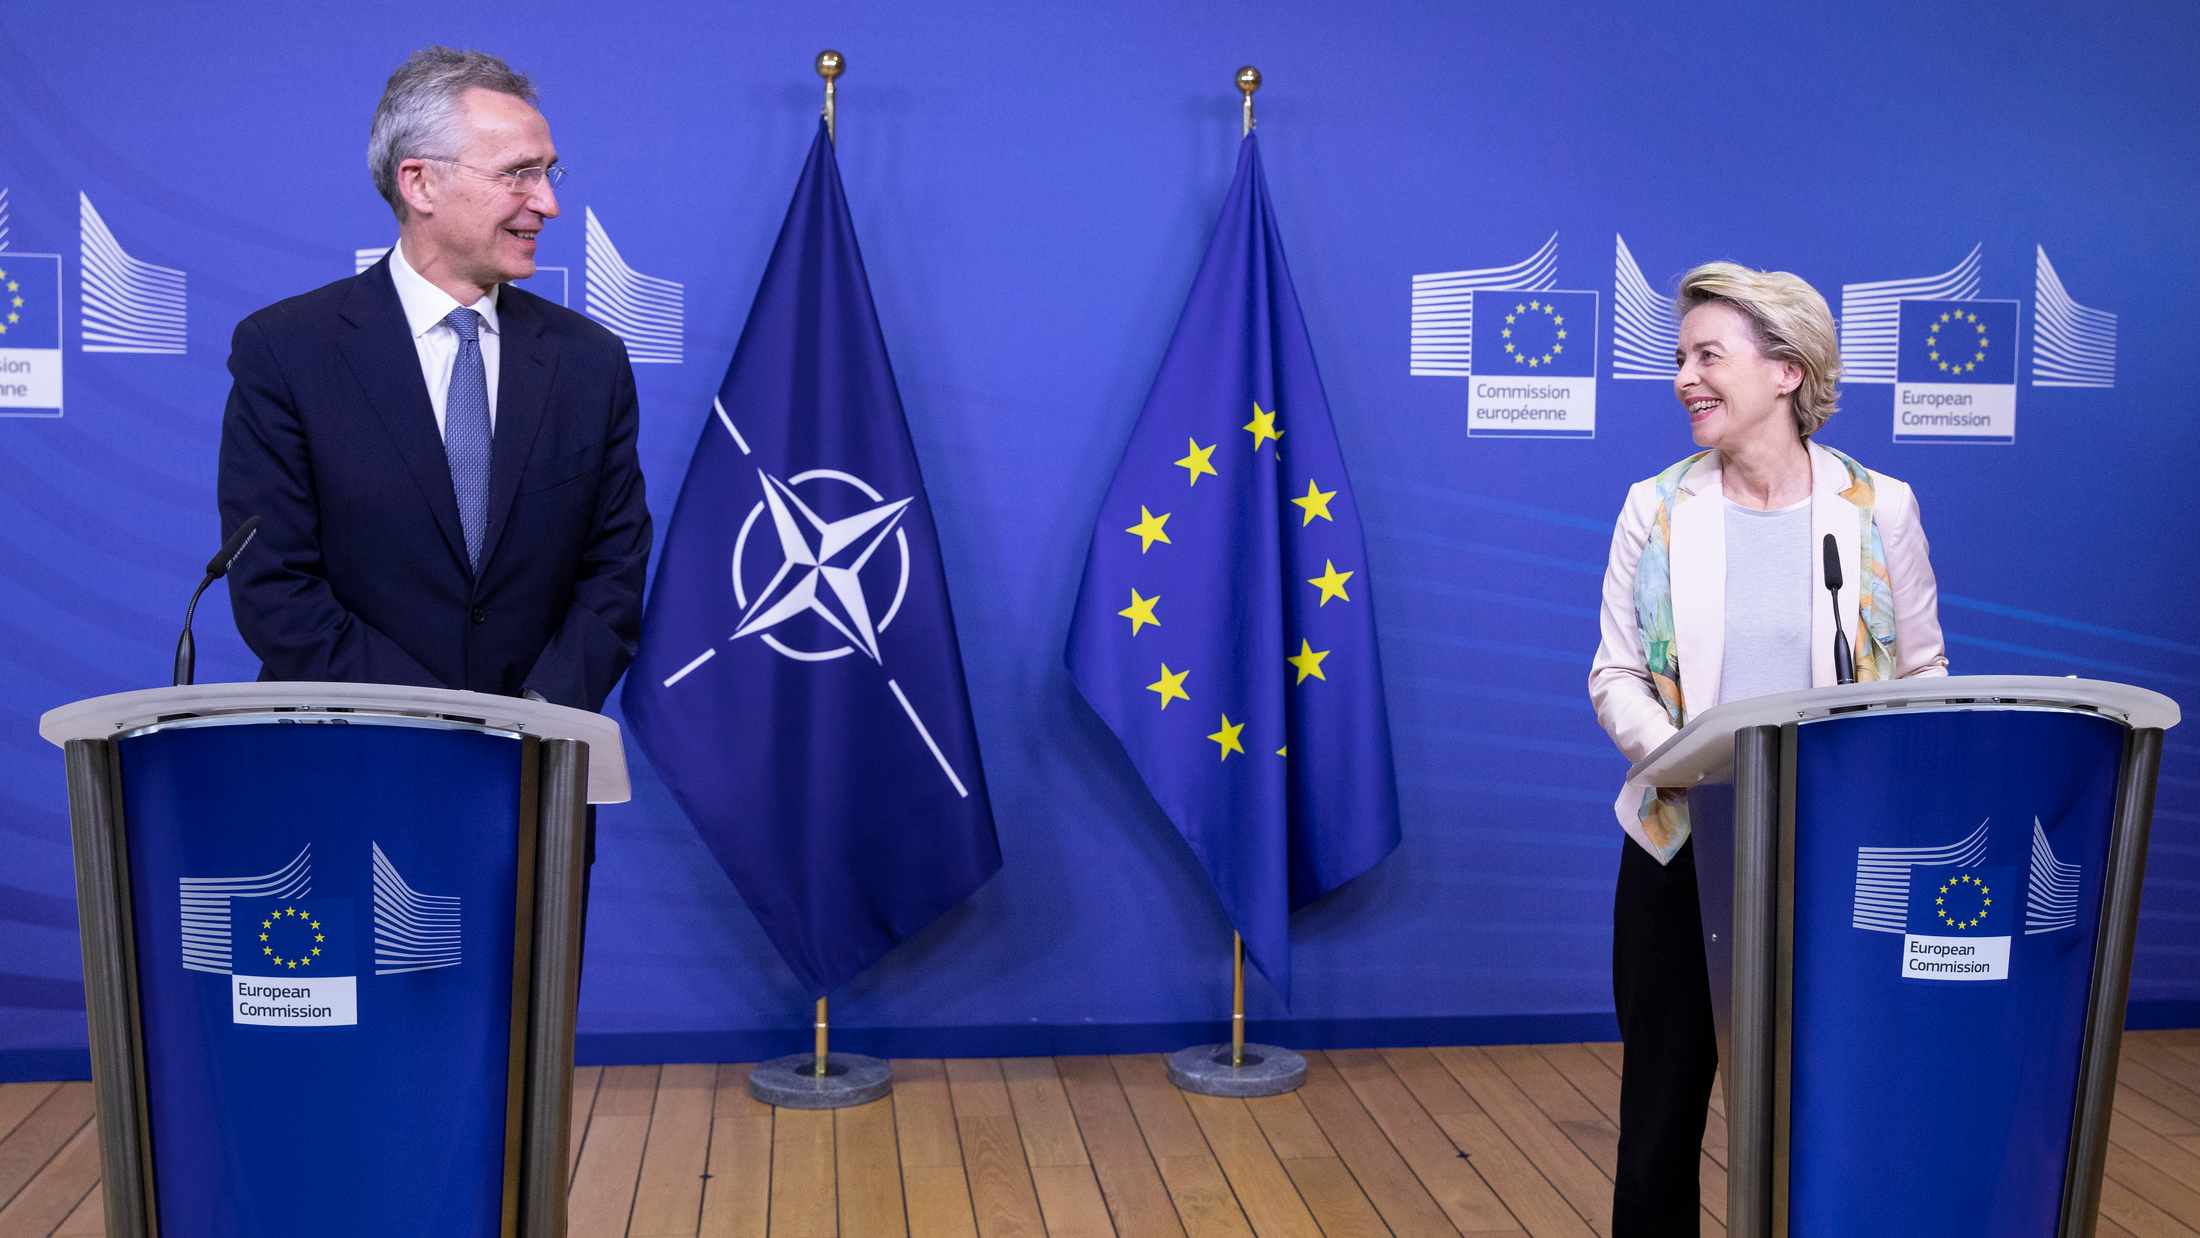 Photo: Joint press statements by NATO Secretary General Jens Stoltenberg and the President of EuropeanCommission, Ursula von der Leyen ahead of a meeting with the College of Commissioners. December 15, 2020. Credit: NATO.